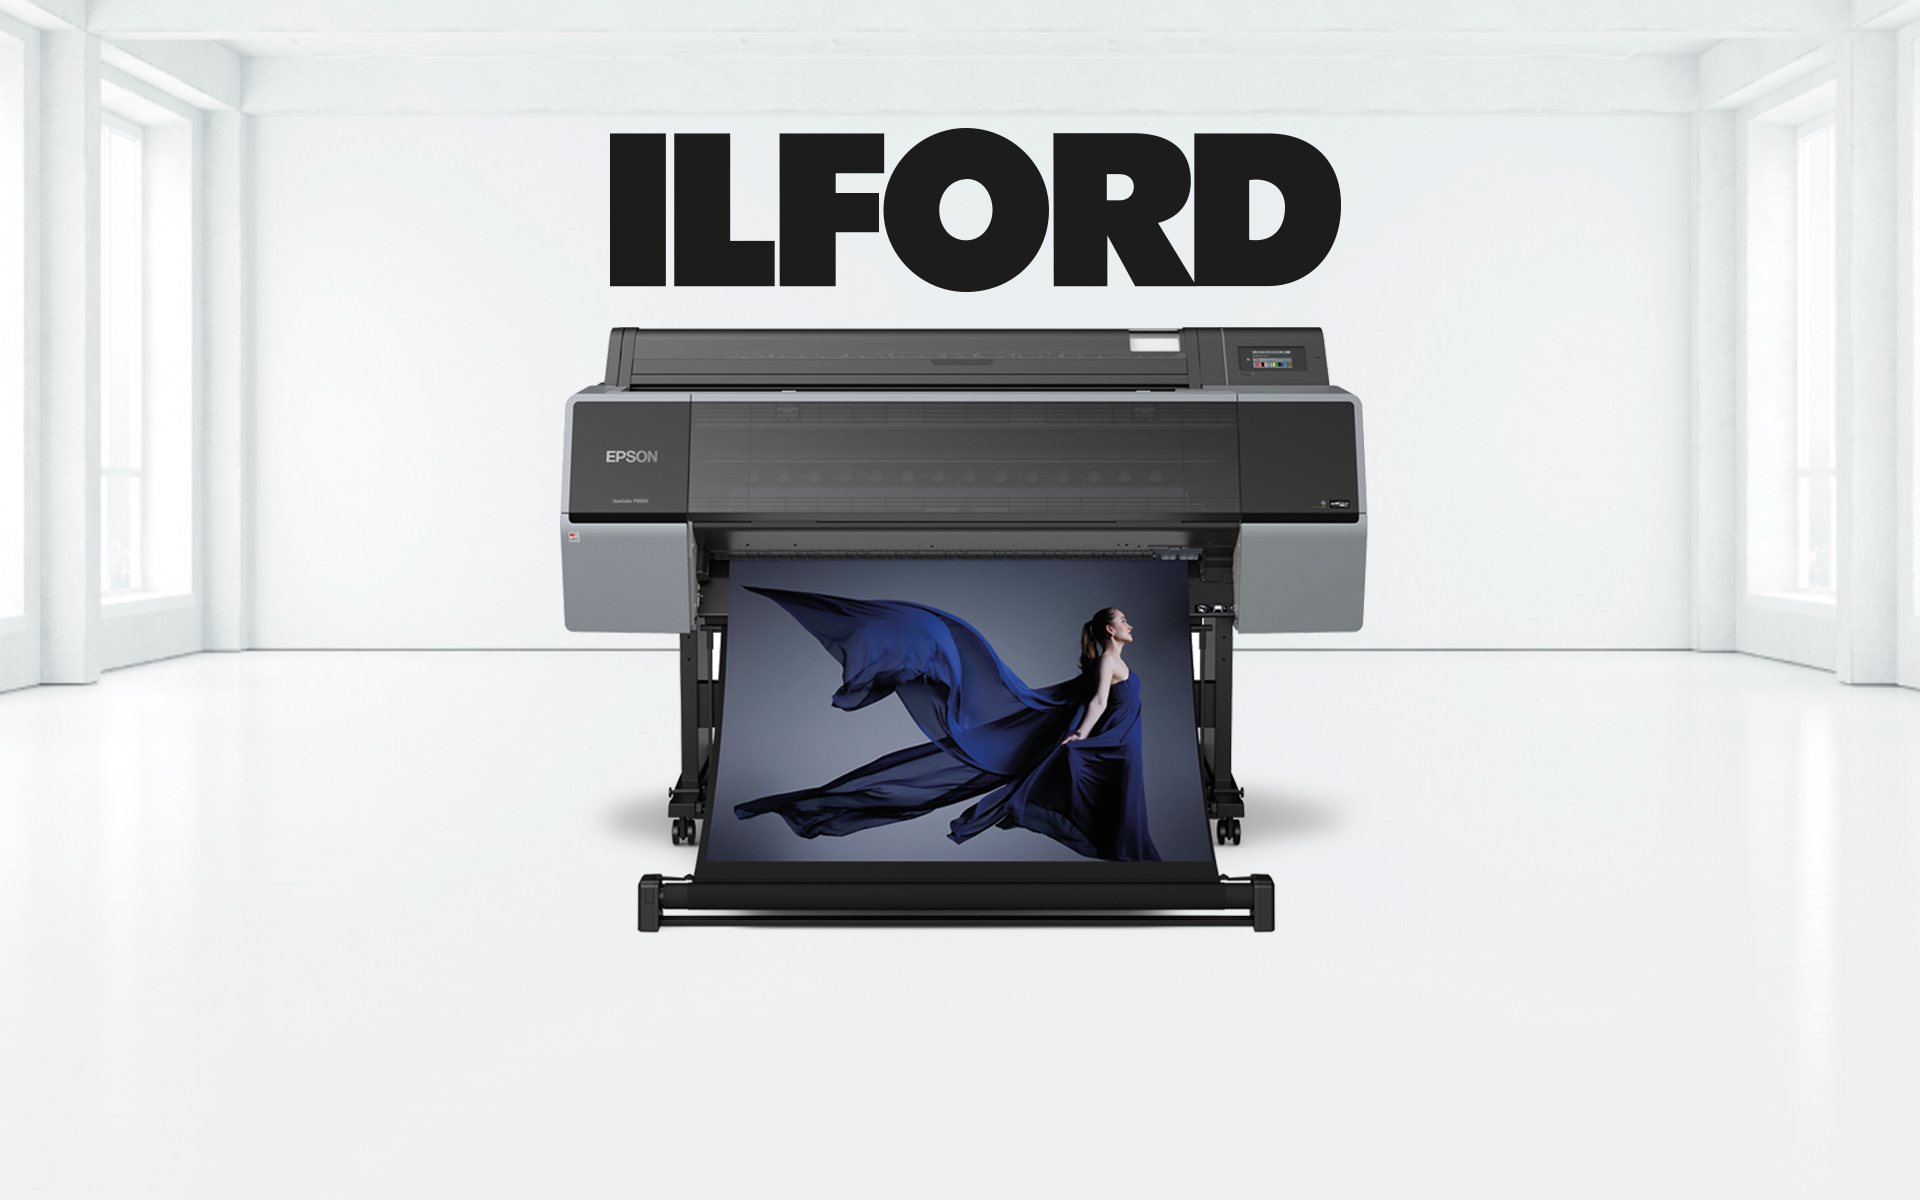 ilford and epson together is the best combination for high quality photo printing